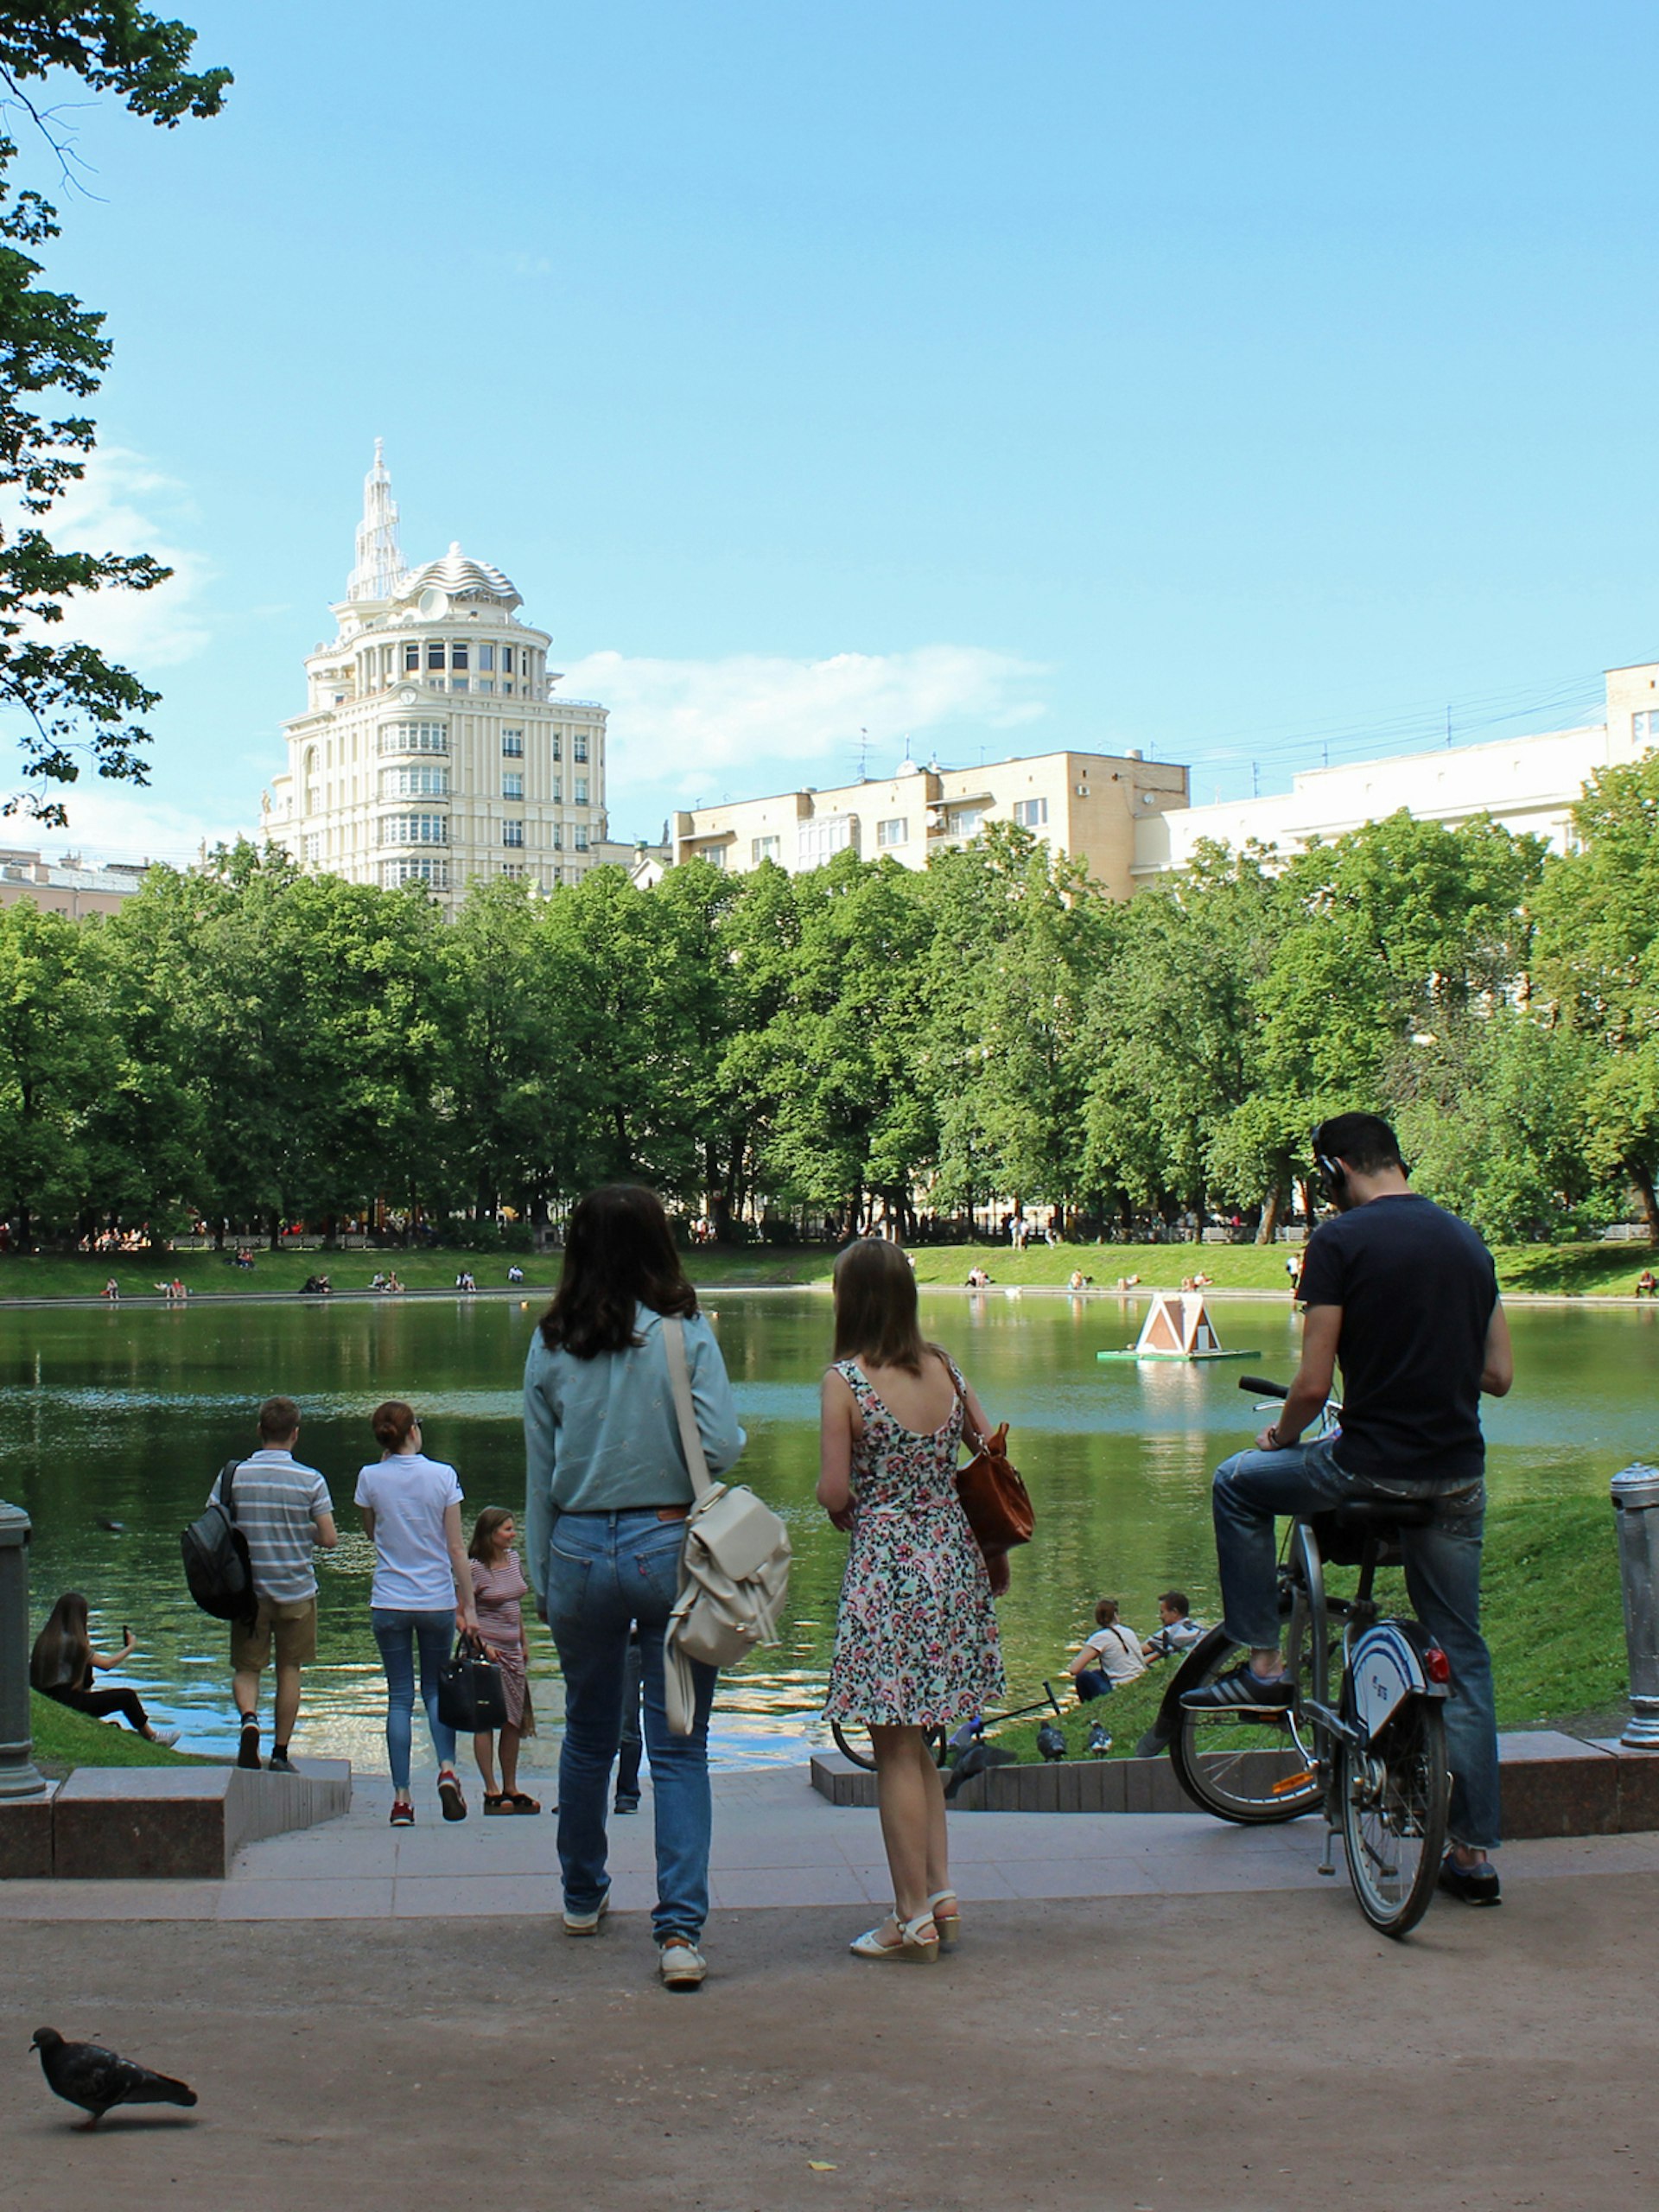 People chilling out at a pond in central Moscow on a summer day